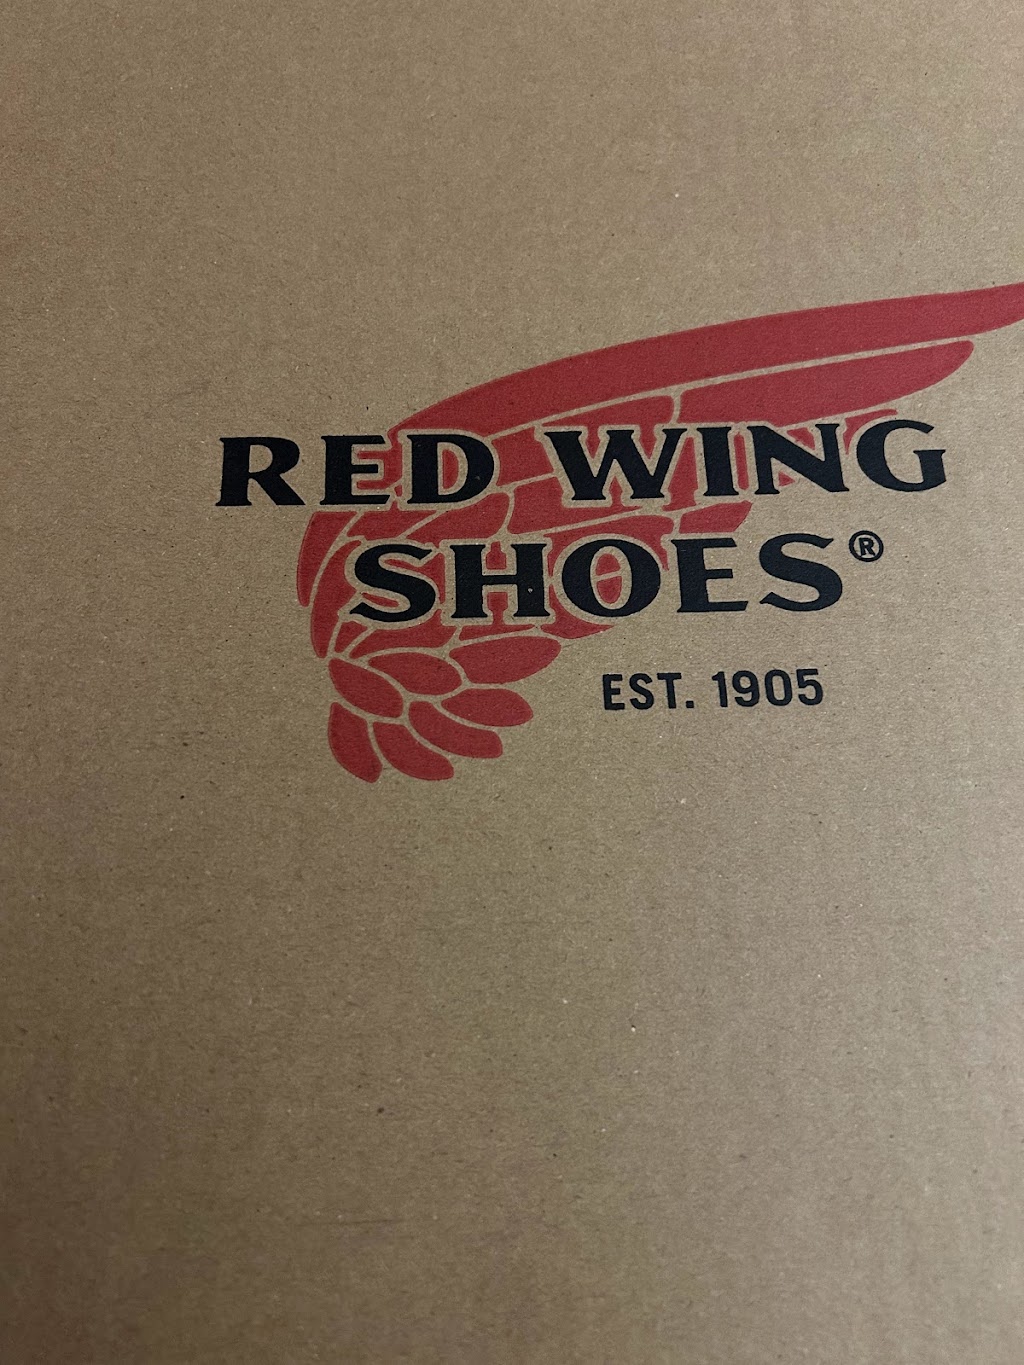 Red Wing - Lombard, IL | 1000 N Rohlwing Rd STE 1 & 2 #1, Lombard, IL 60148, USA | Phone: (630) 792-0416